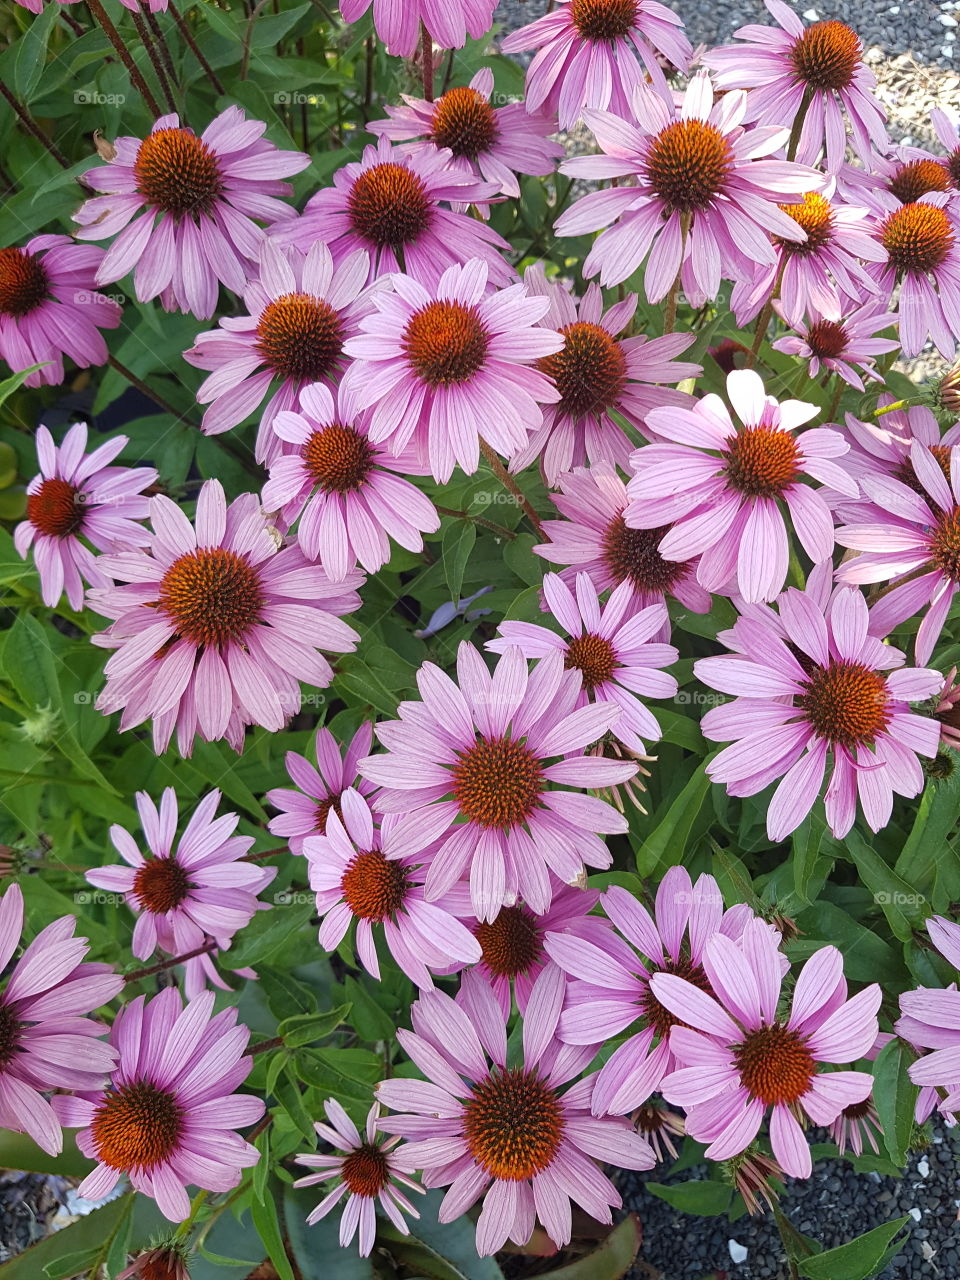 Beautiful pink Daisy's. I never get sick 9f the beauty nature has to show us all. life would be so boring without flowers.